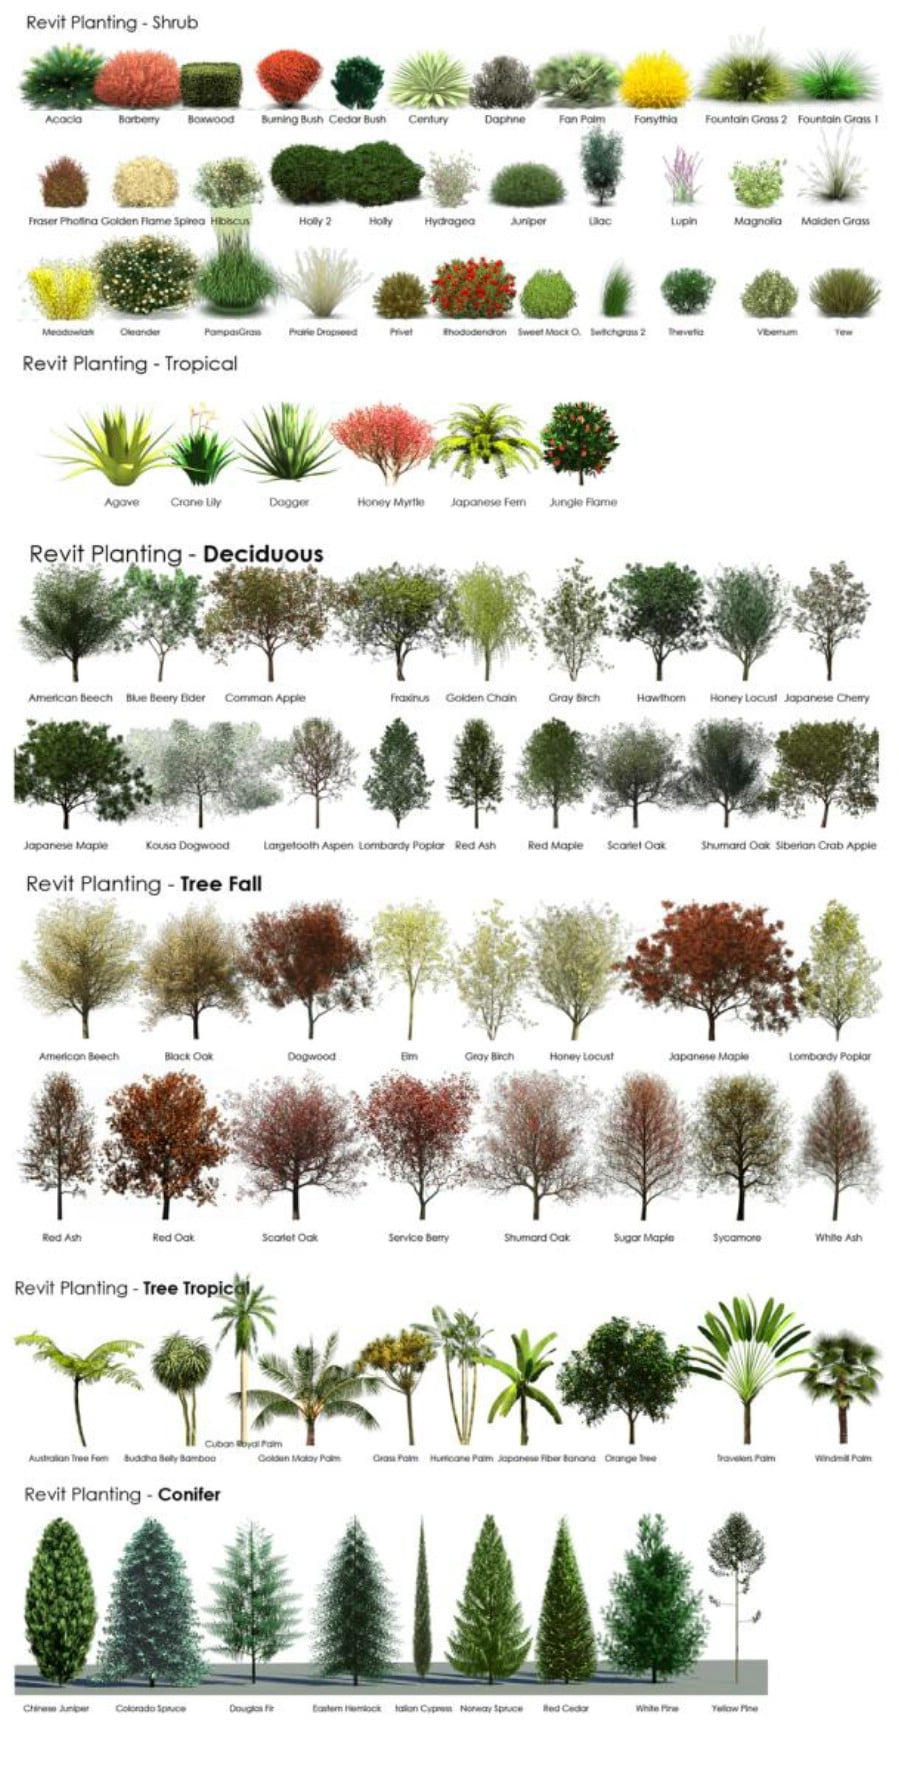 18. Check out this amazing tree and shrubbery guide - 50 Amazingly Clever Cheat Sheets To Simplify Home Decorating Projects